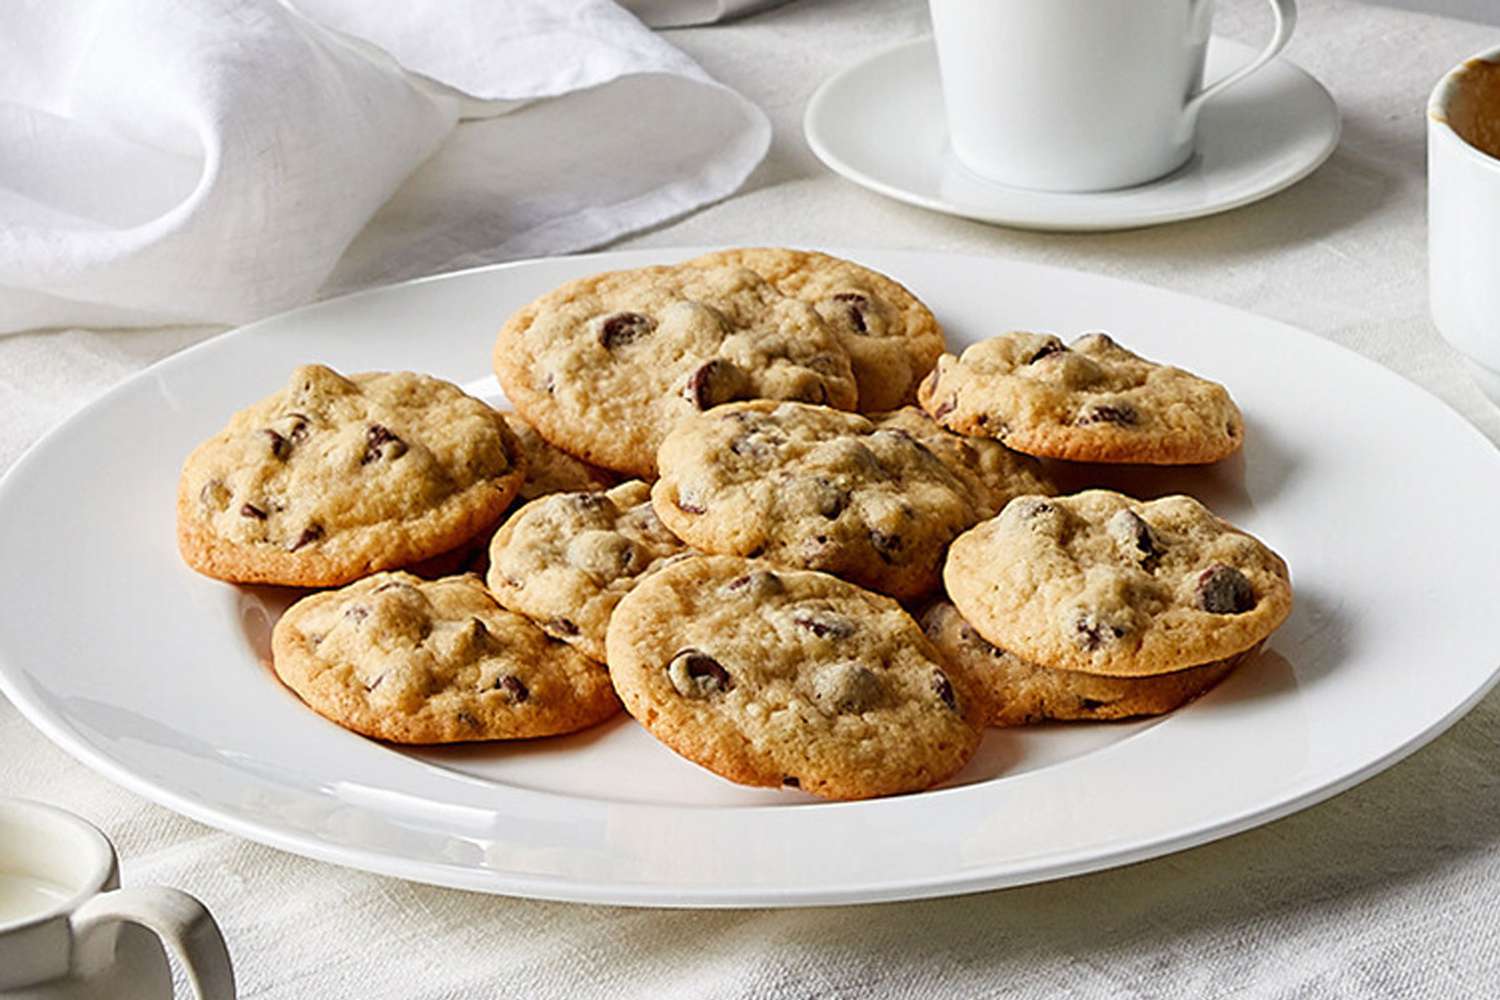 <p>Soft and chewy beats both thin and crispy and cakey chocolate chip cookies according to our home bakers. This foolproof recipe shows you why. Bet you can't eat just one!</p>
                          